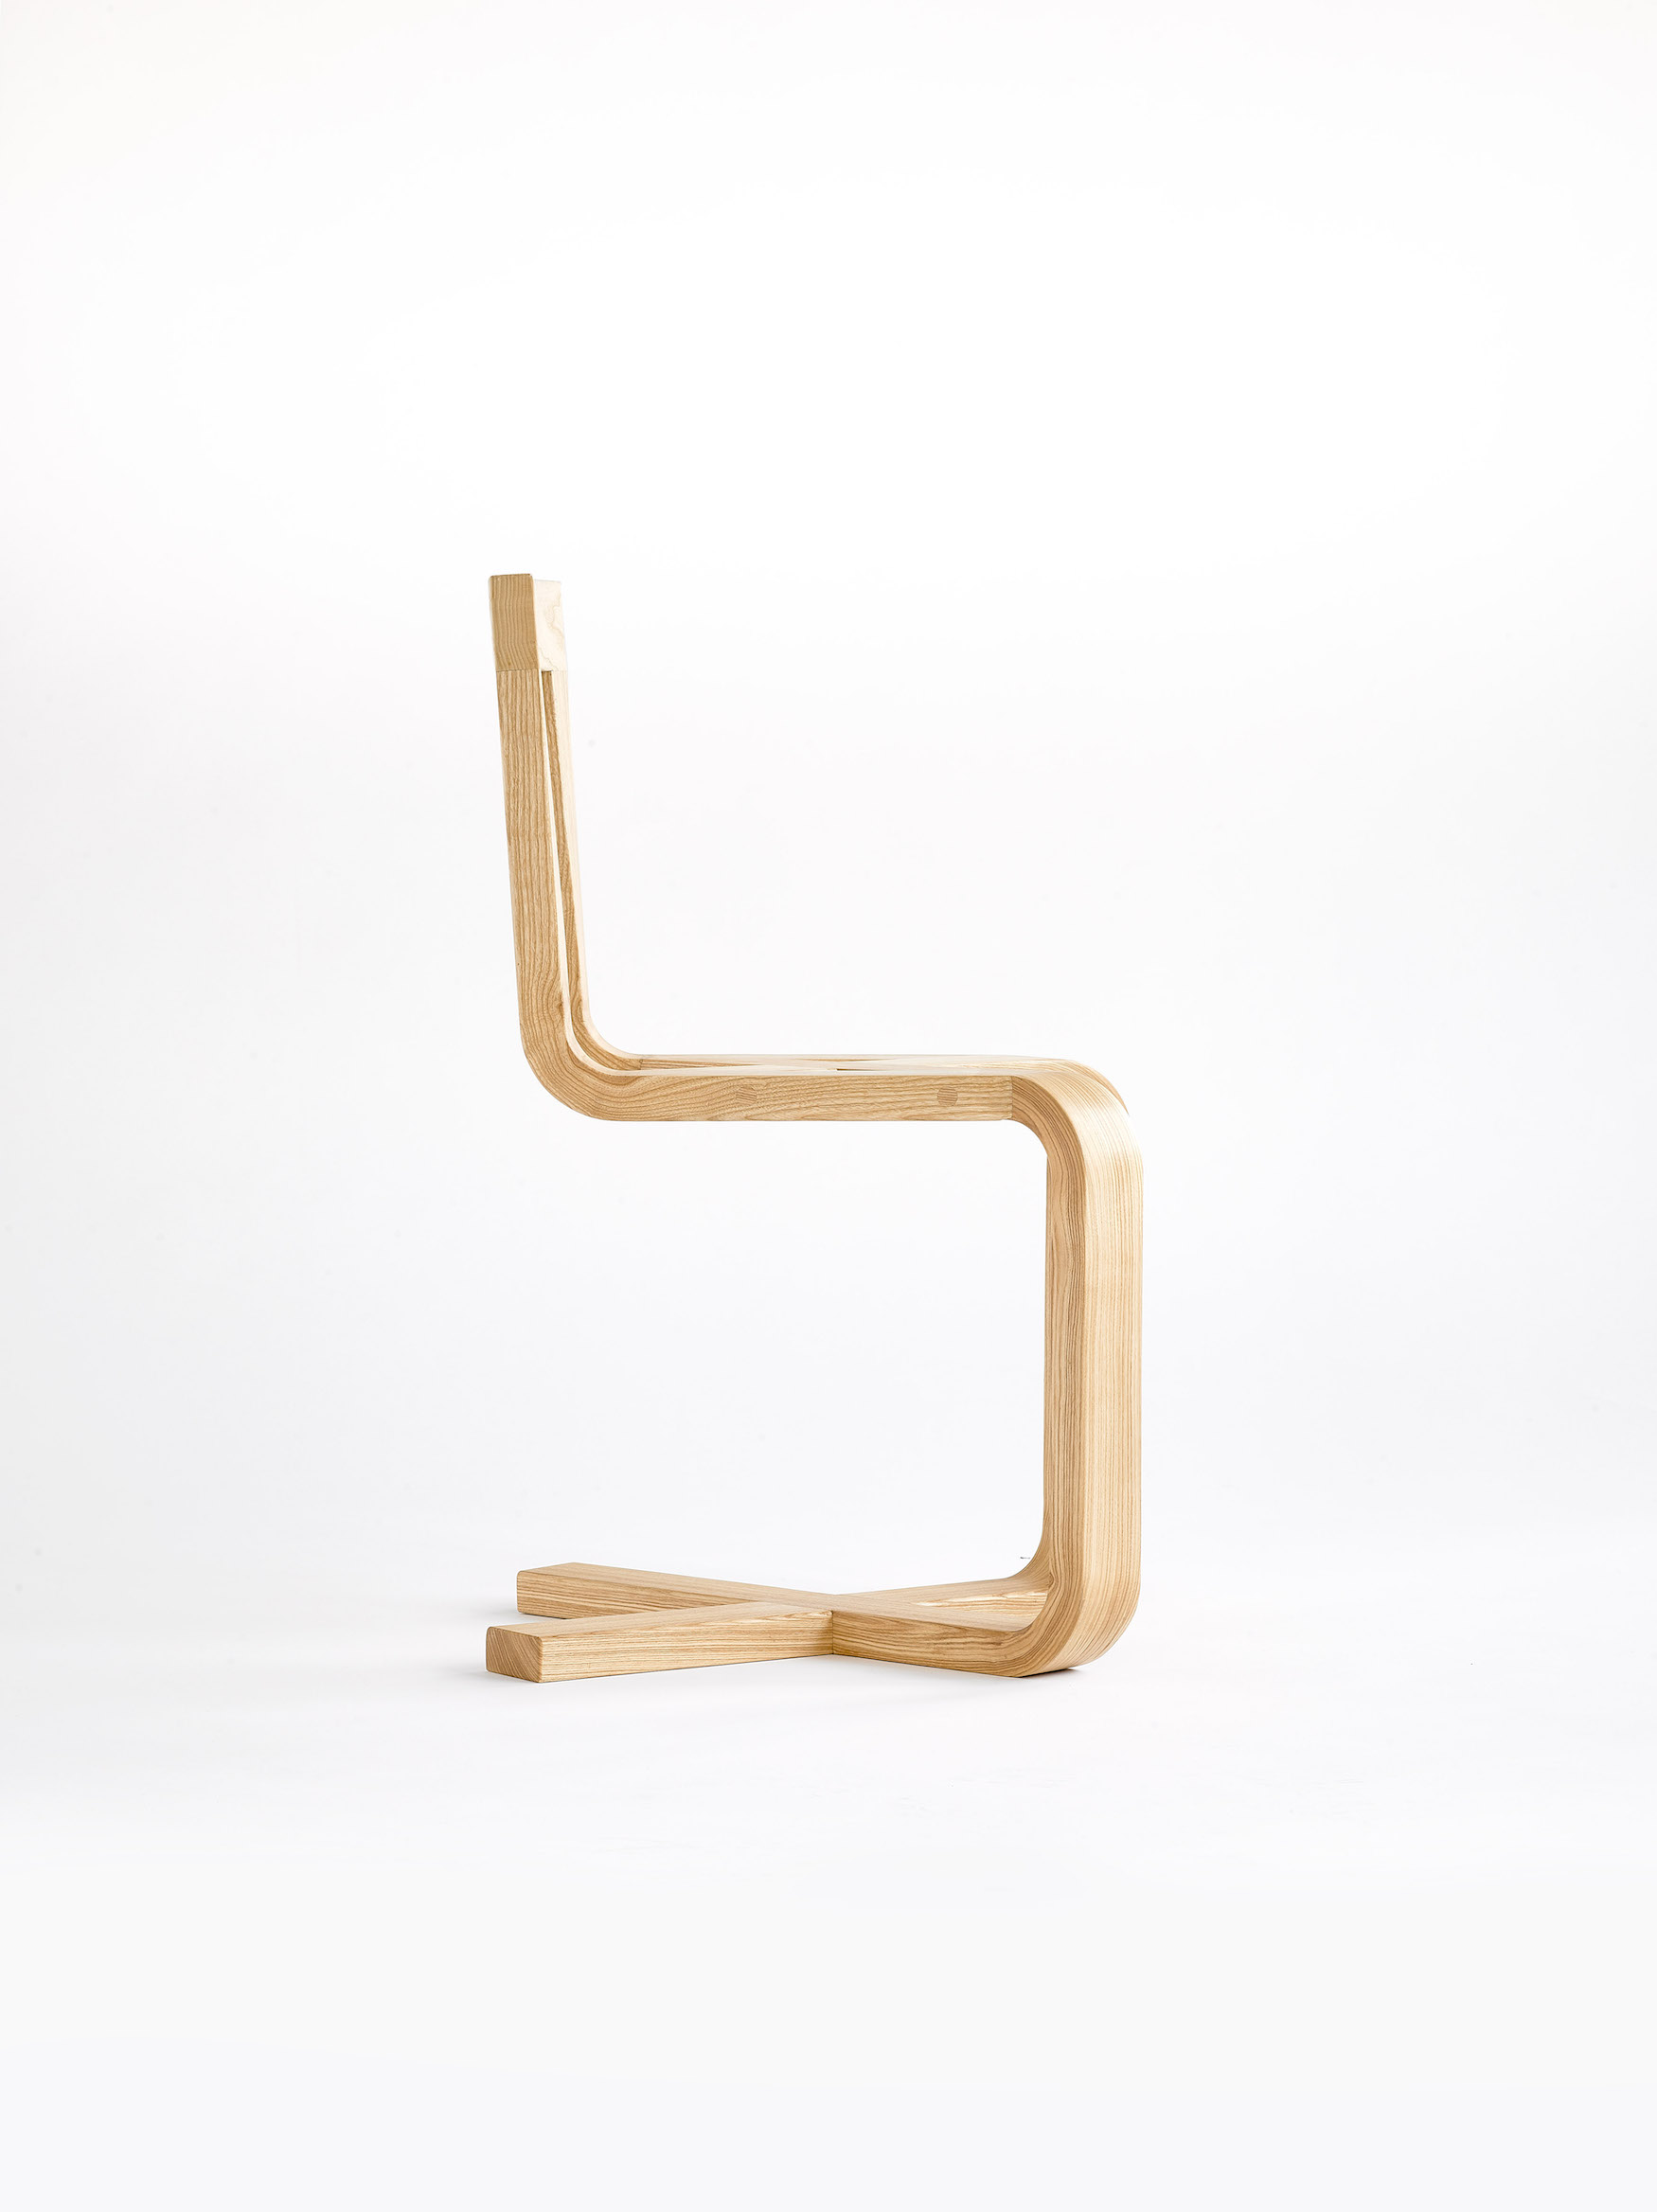 LCX Chair by Florian Hauswirth for Winkler